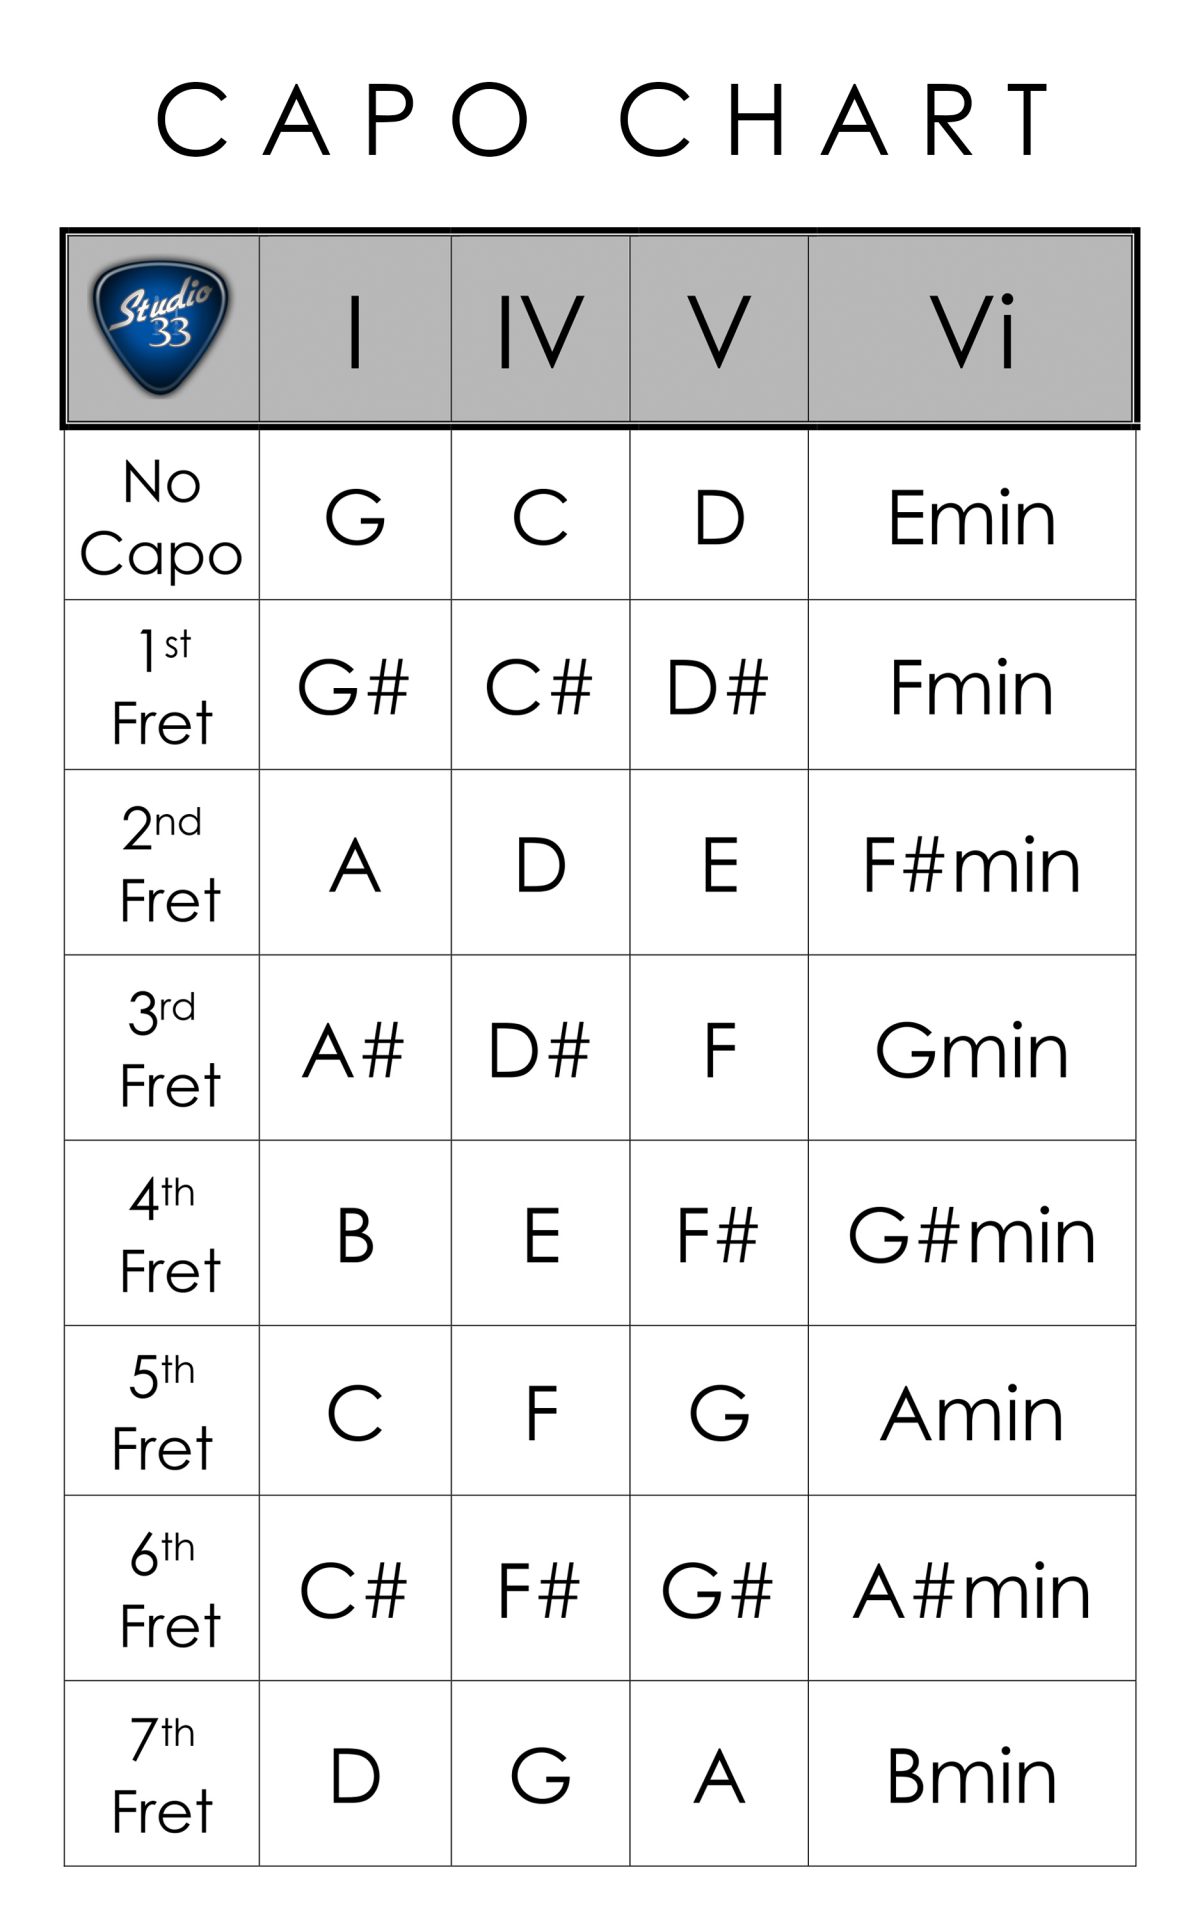 Play Hundreds of Songs with these 4 Chords! - Studio 33 Guitar Lessons